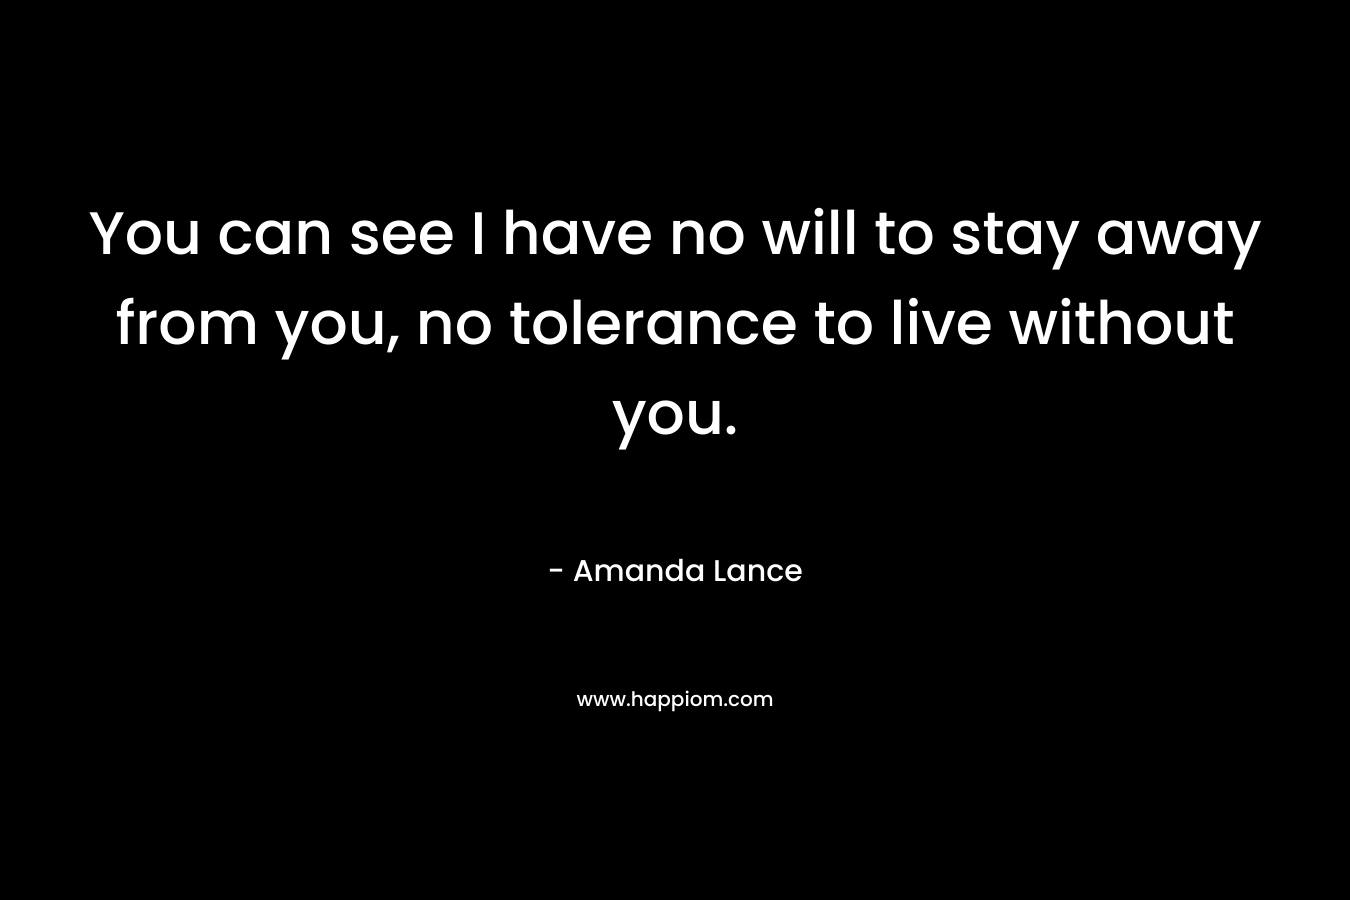 You can see I have no will to stay away from you, no tolerance to live without you. – Amanda Lance